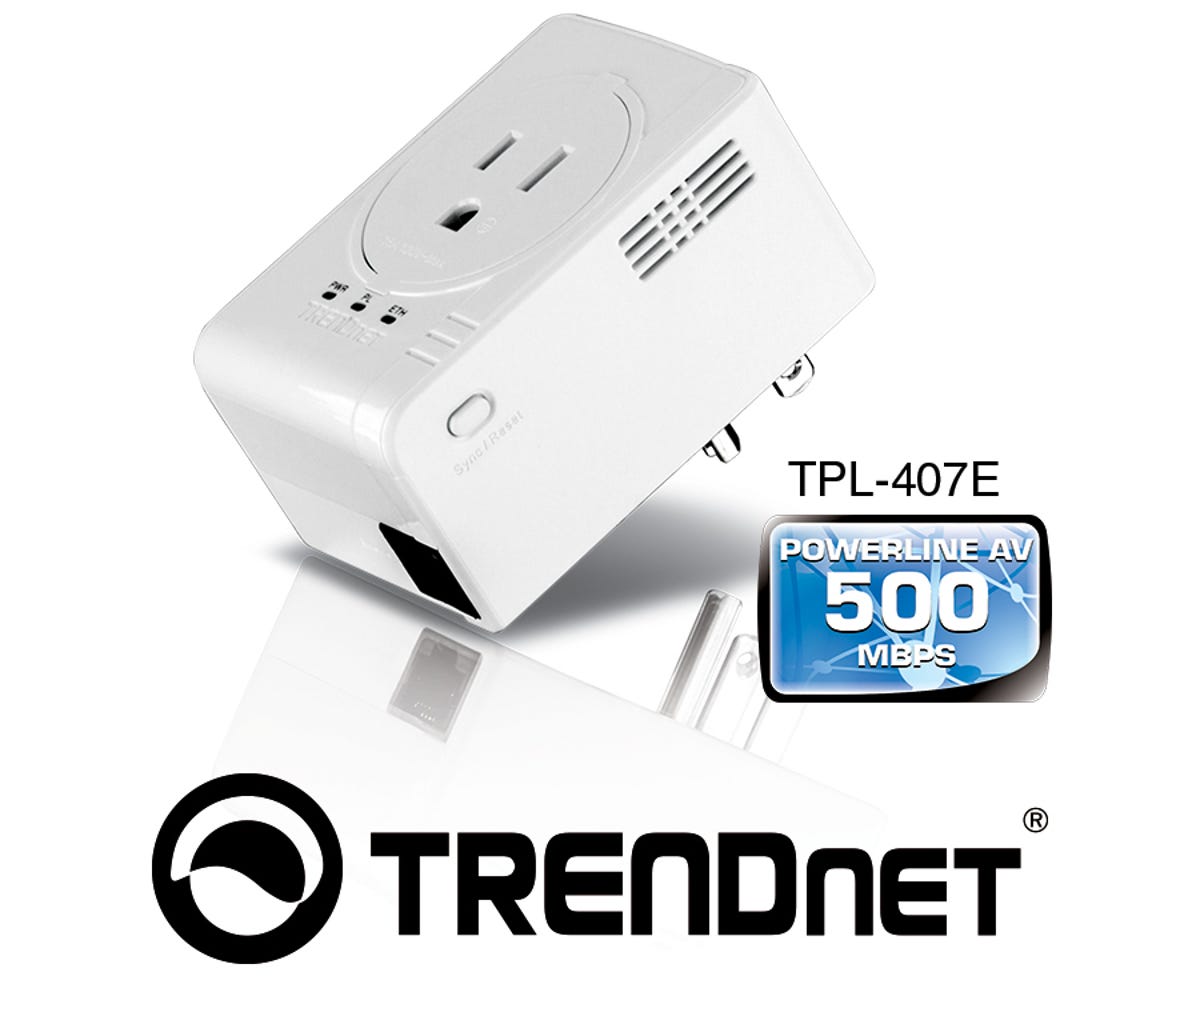 The new TPL-407E Powerline AV500 adapter from Trendnet is much smaller than its peers.